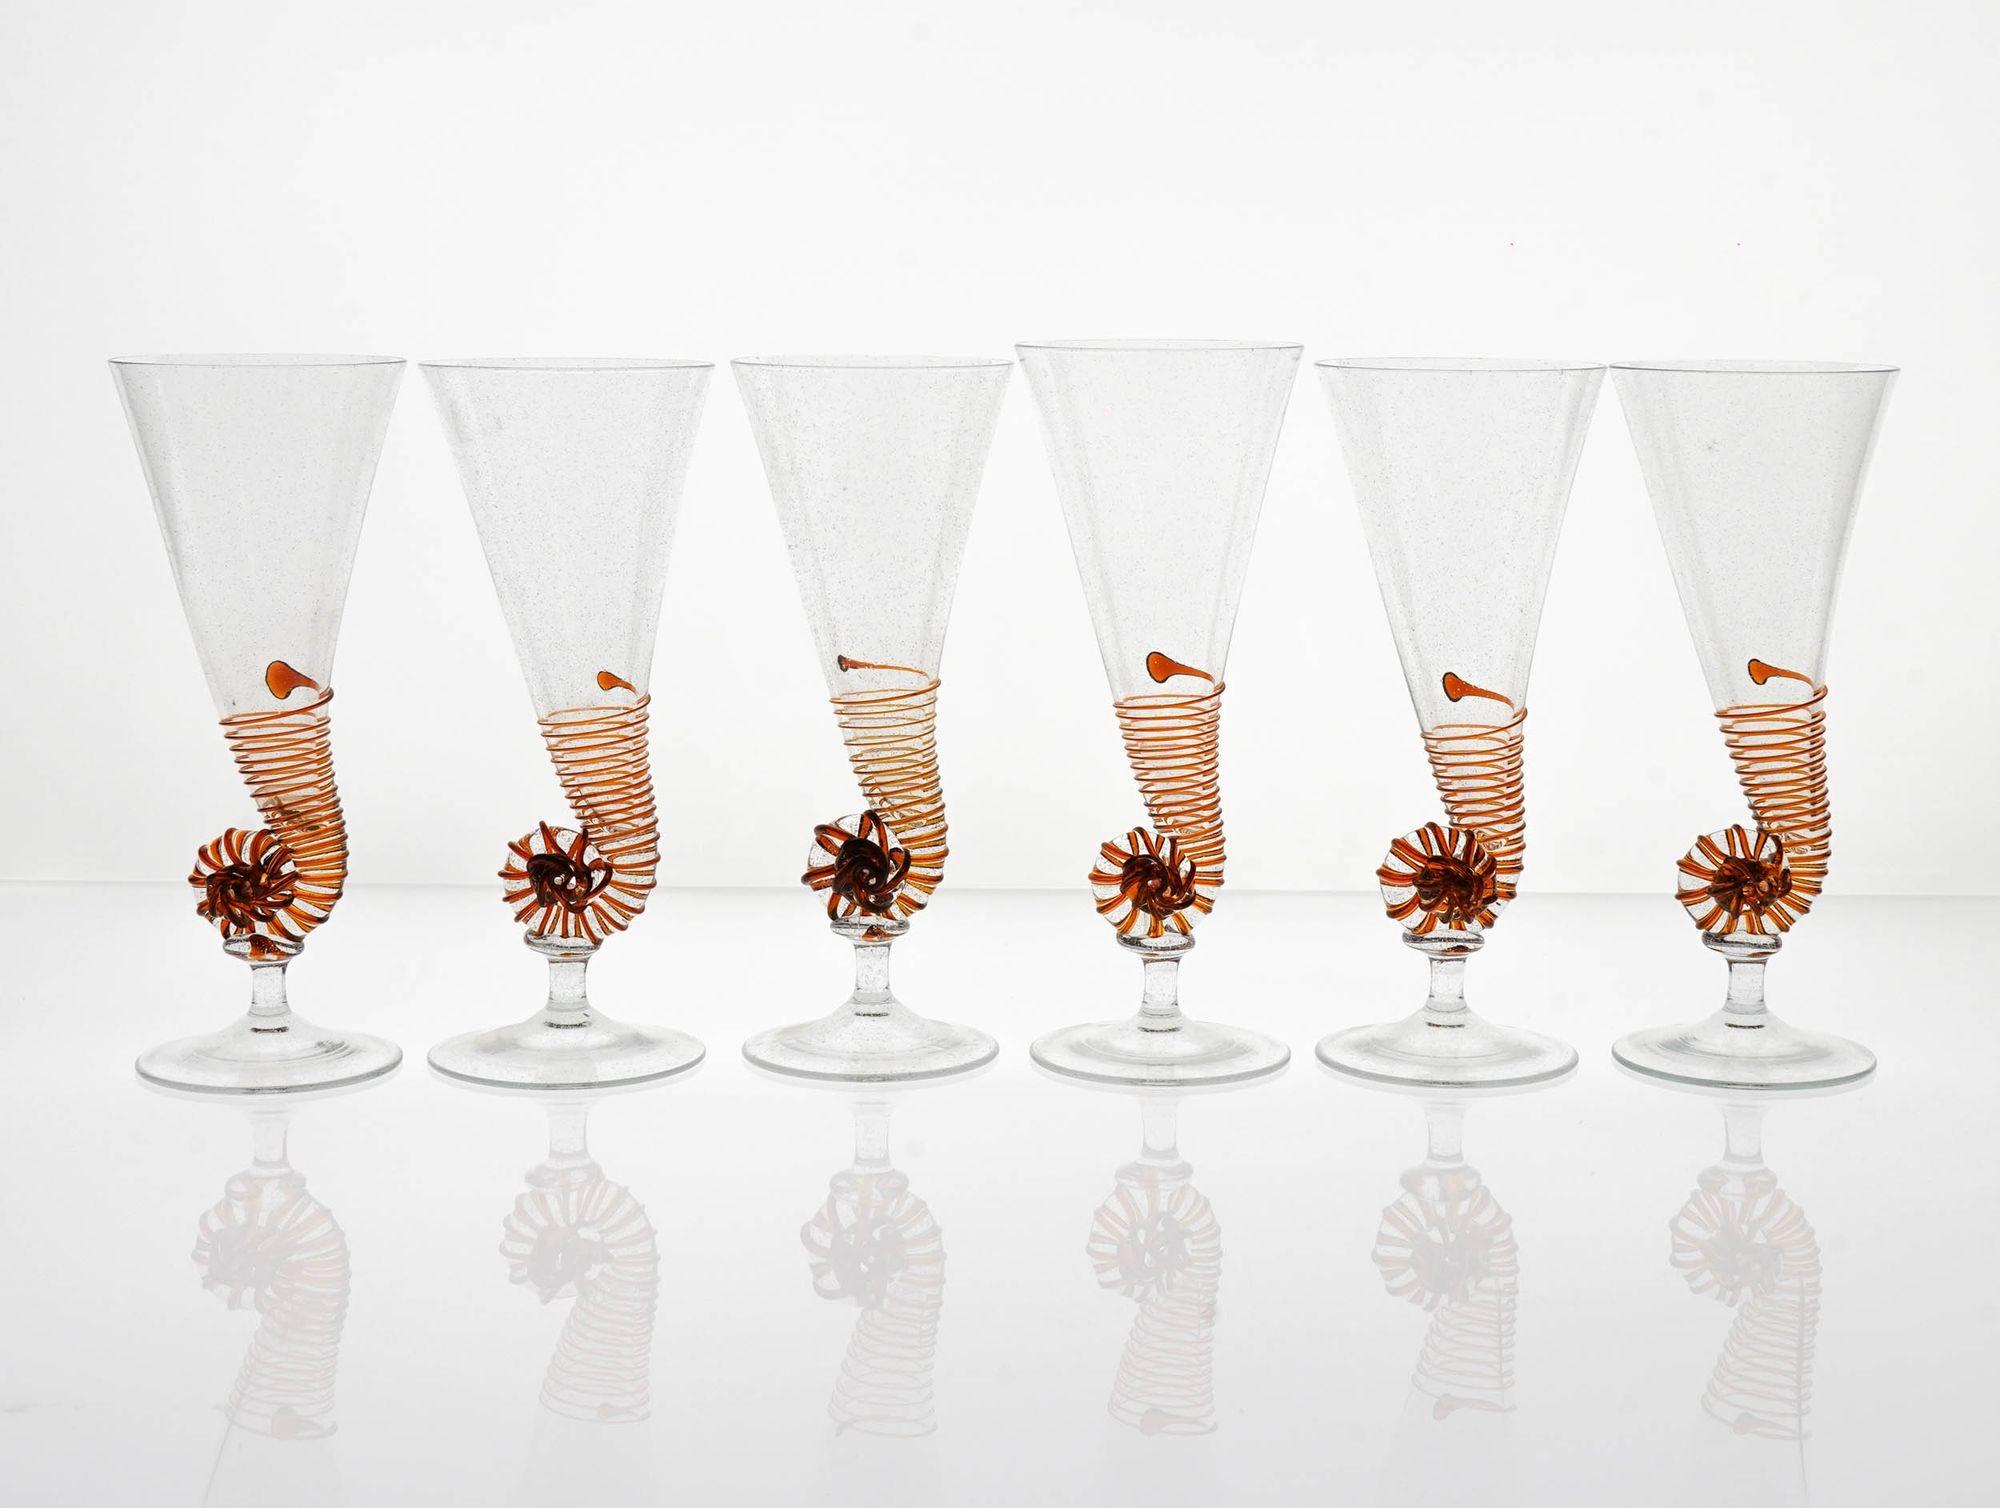 Introducing this rare and exceptional set of antique Murano glass flutes, inspired by the nautilus shell.

These unique and handcrafted flutes are a masterpiece of craftsmanship, made in the 1950s by Cenedese, one of the most renowned glassmakers of